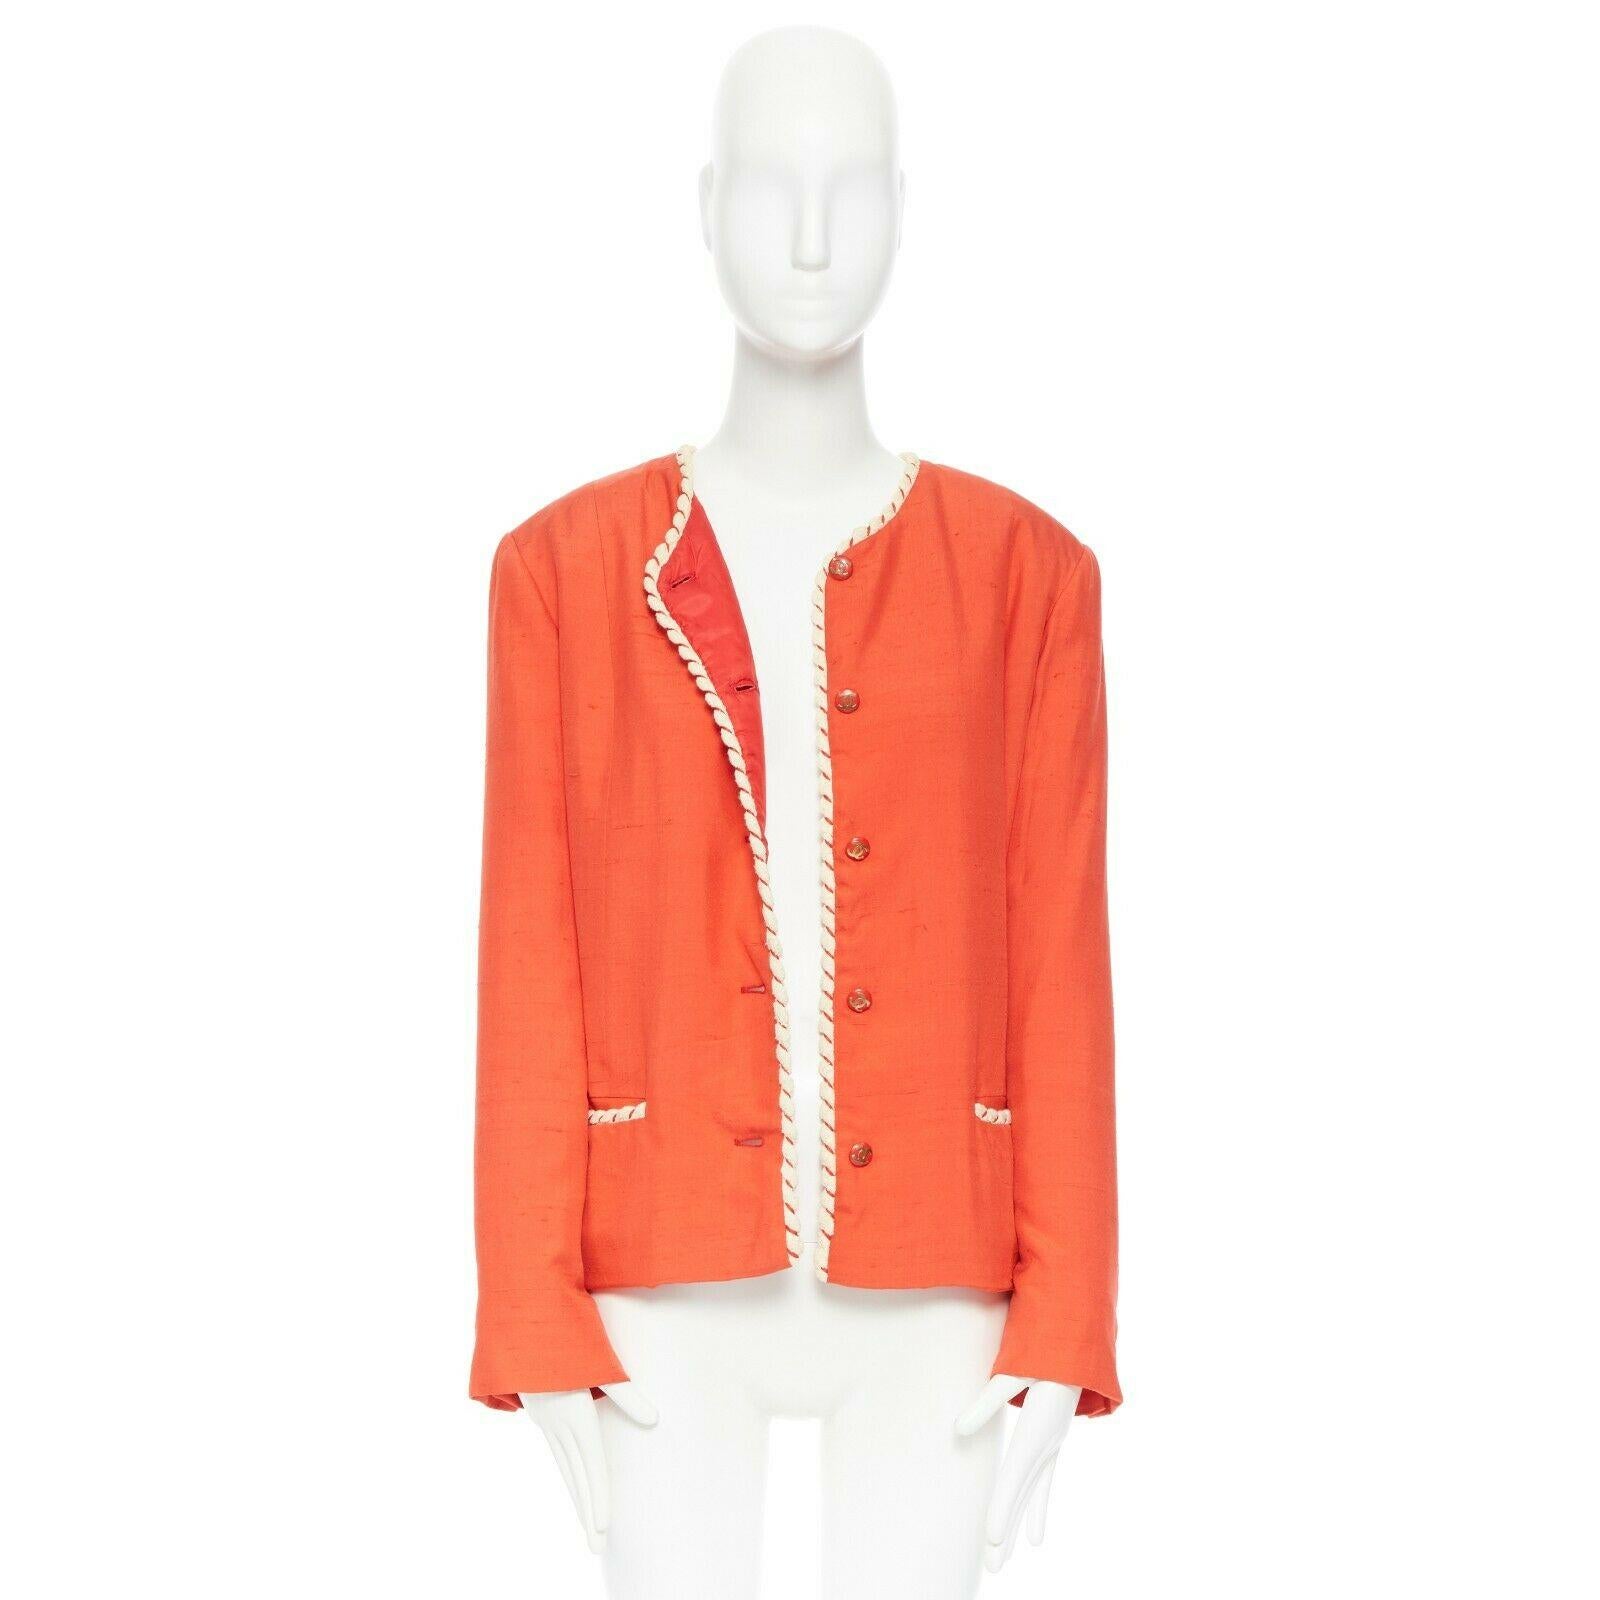 CHANEL CREATIONS  Vintage 1970's red orange quilted lining  trim jacket US16 XL
Brand: CHANEL
Model Name / Style: Quilted jacket
Material: Other; composition lael removed. Feels like linen.
Color: Red; vermillon red
Pattern: Solid
Closure: